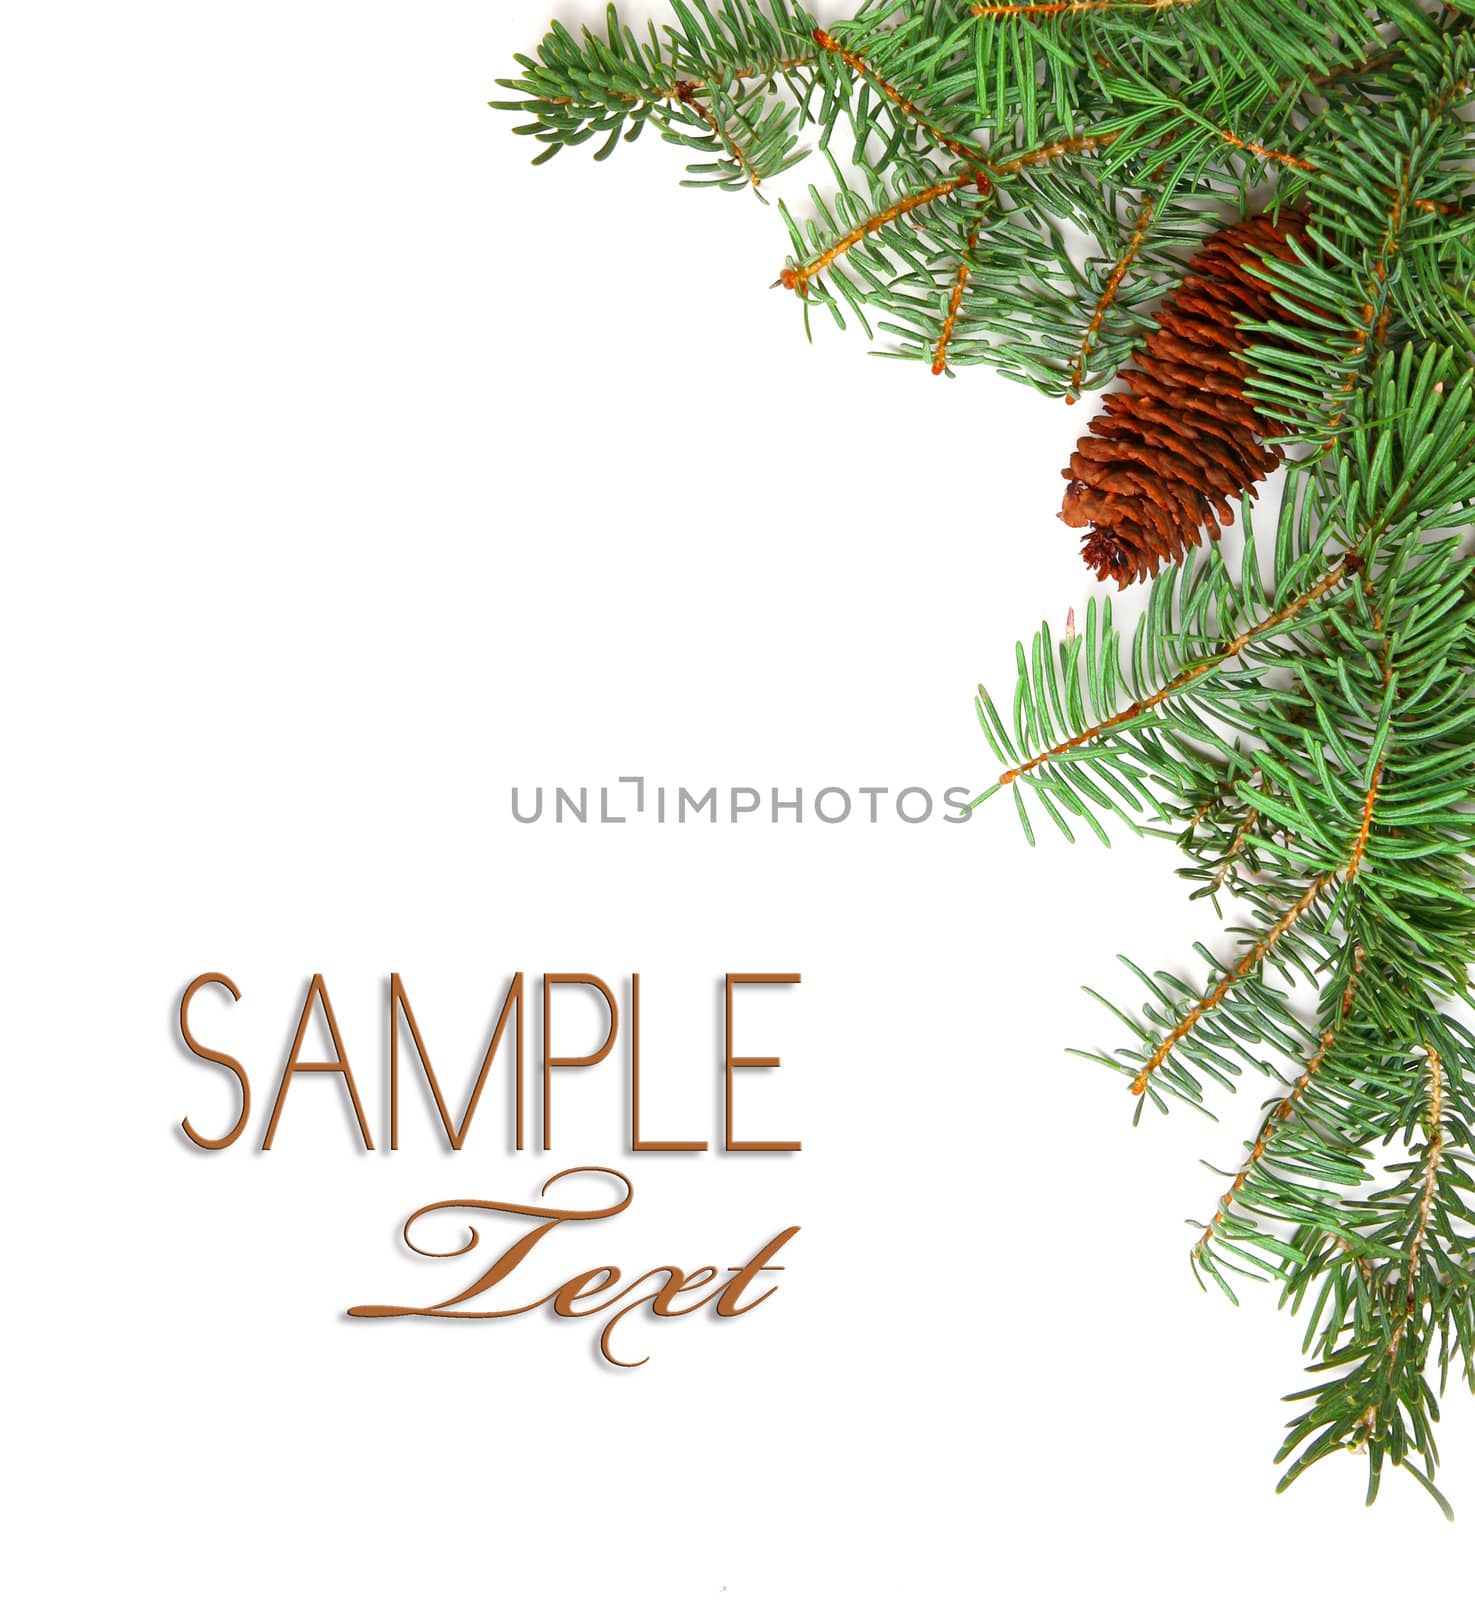 Christmas Rustic Image of Pine Tree Stems and a Pinecone on White Background With Copyspace For Your Design